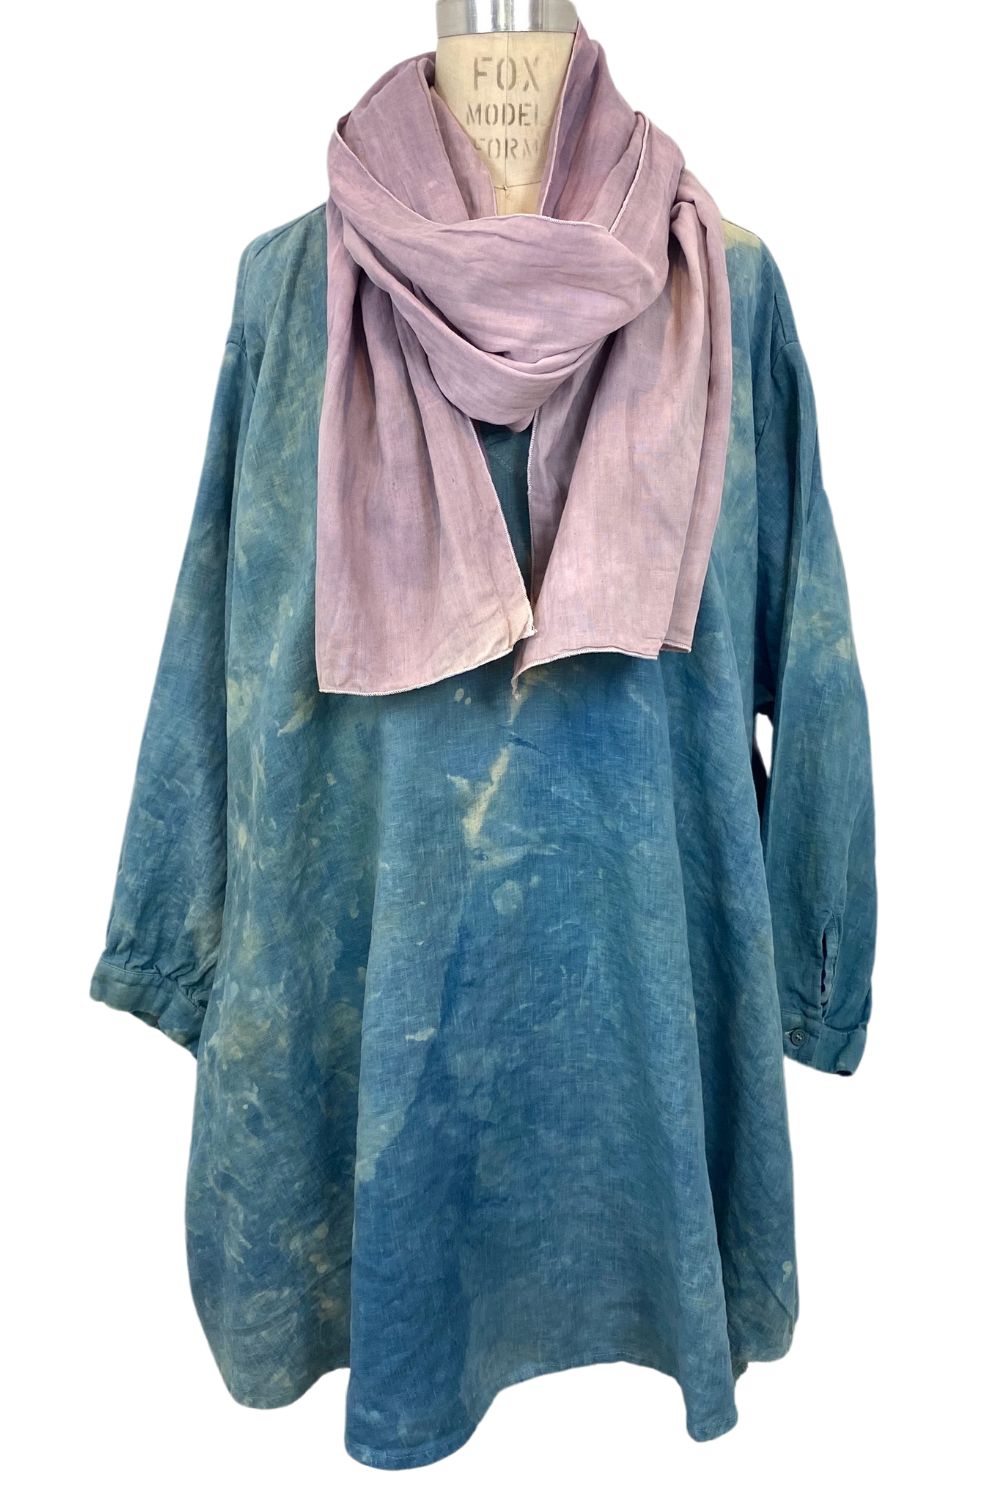 Botanically Dyed Linen Tunic in Blue Mist